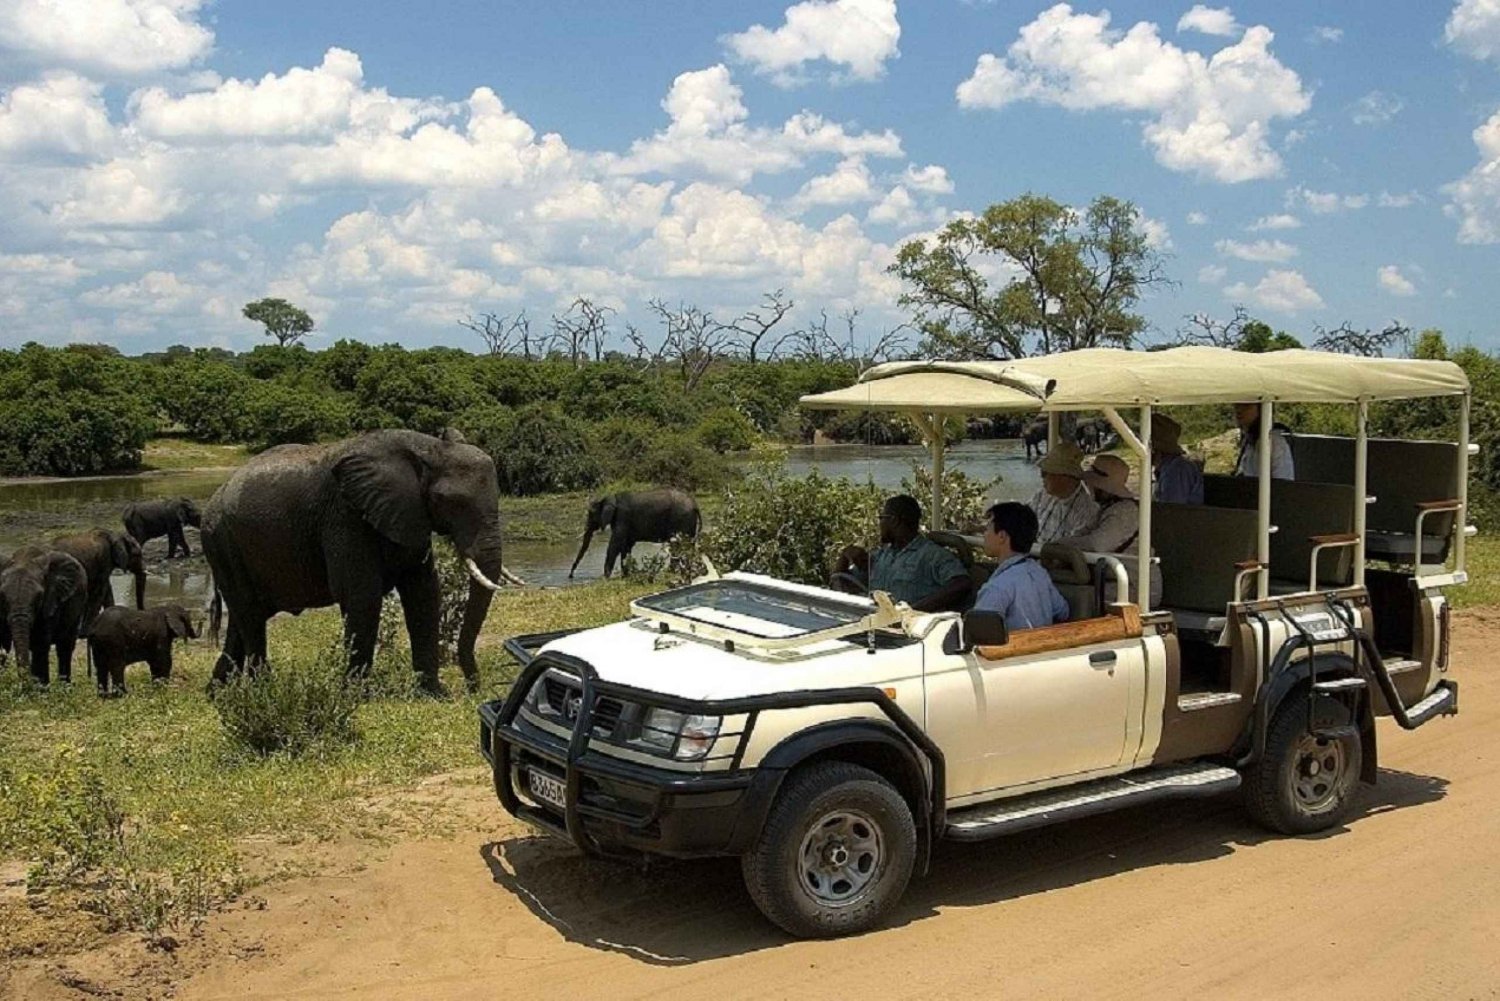 Chobe day trip from Victoria Falls